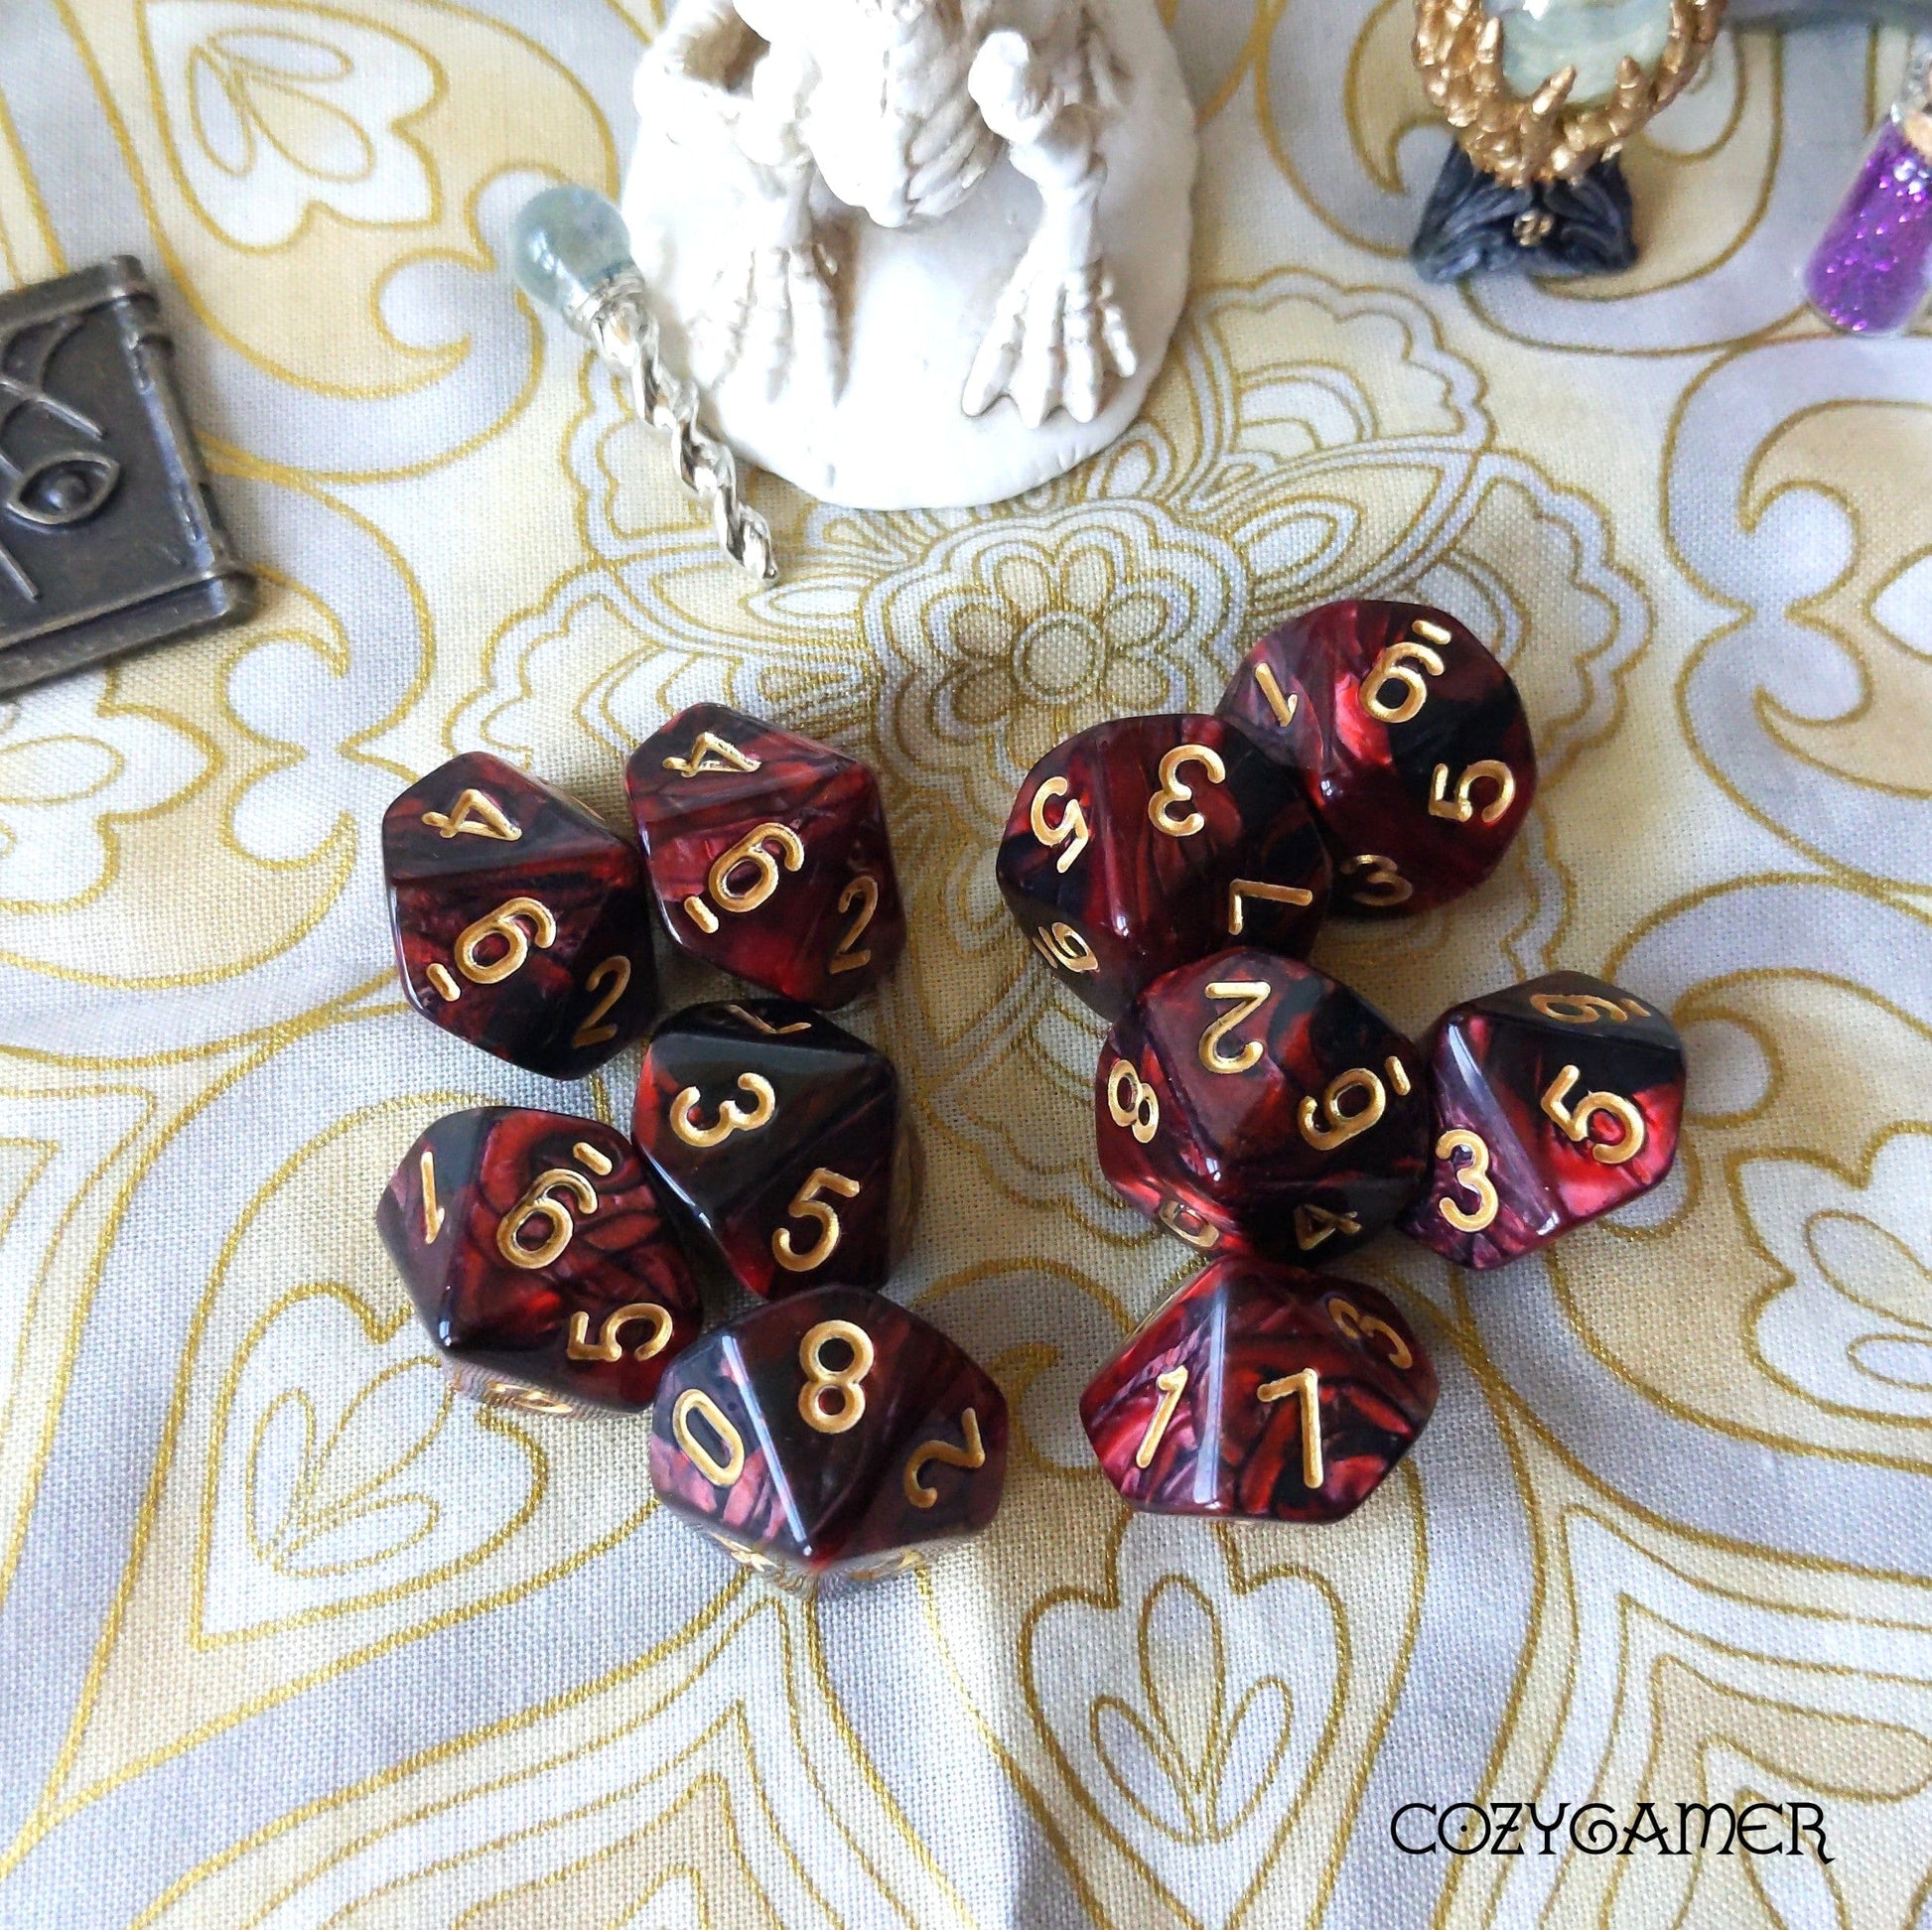 Blood set of D10s. 10 piece set of ten sided dice